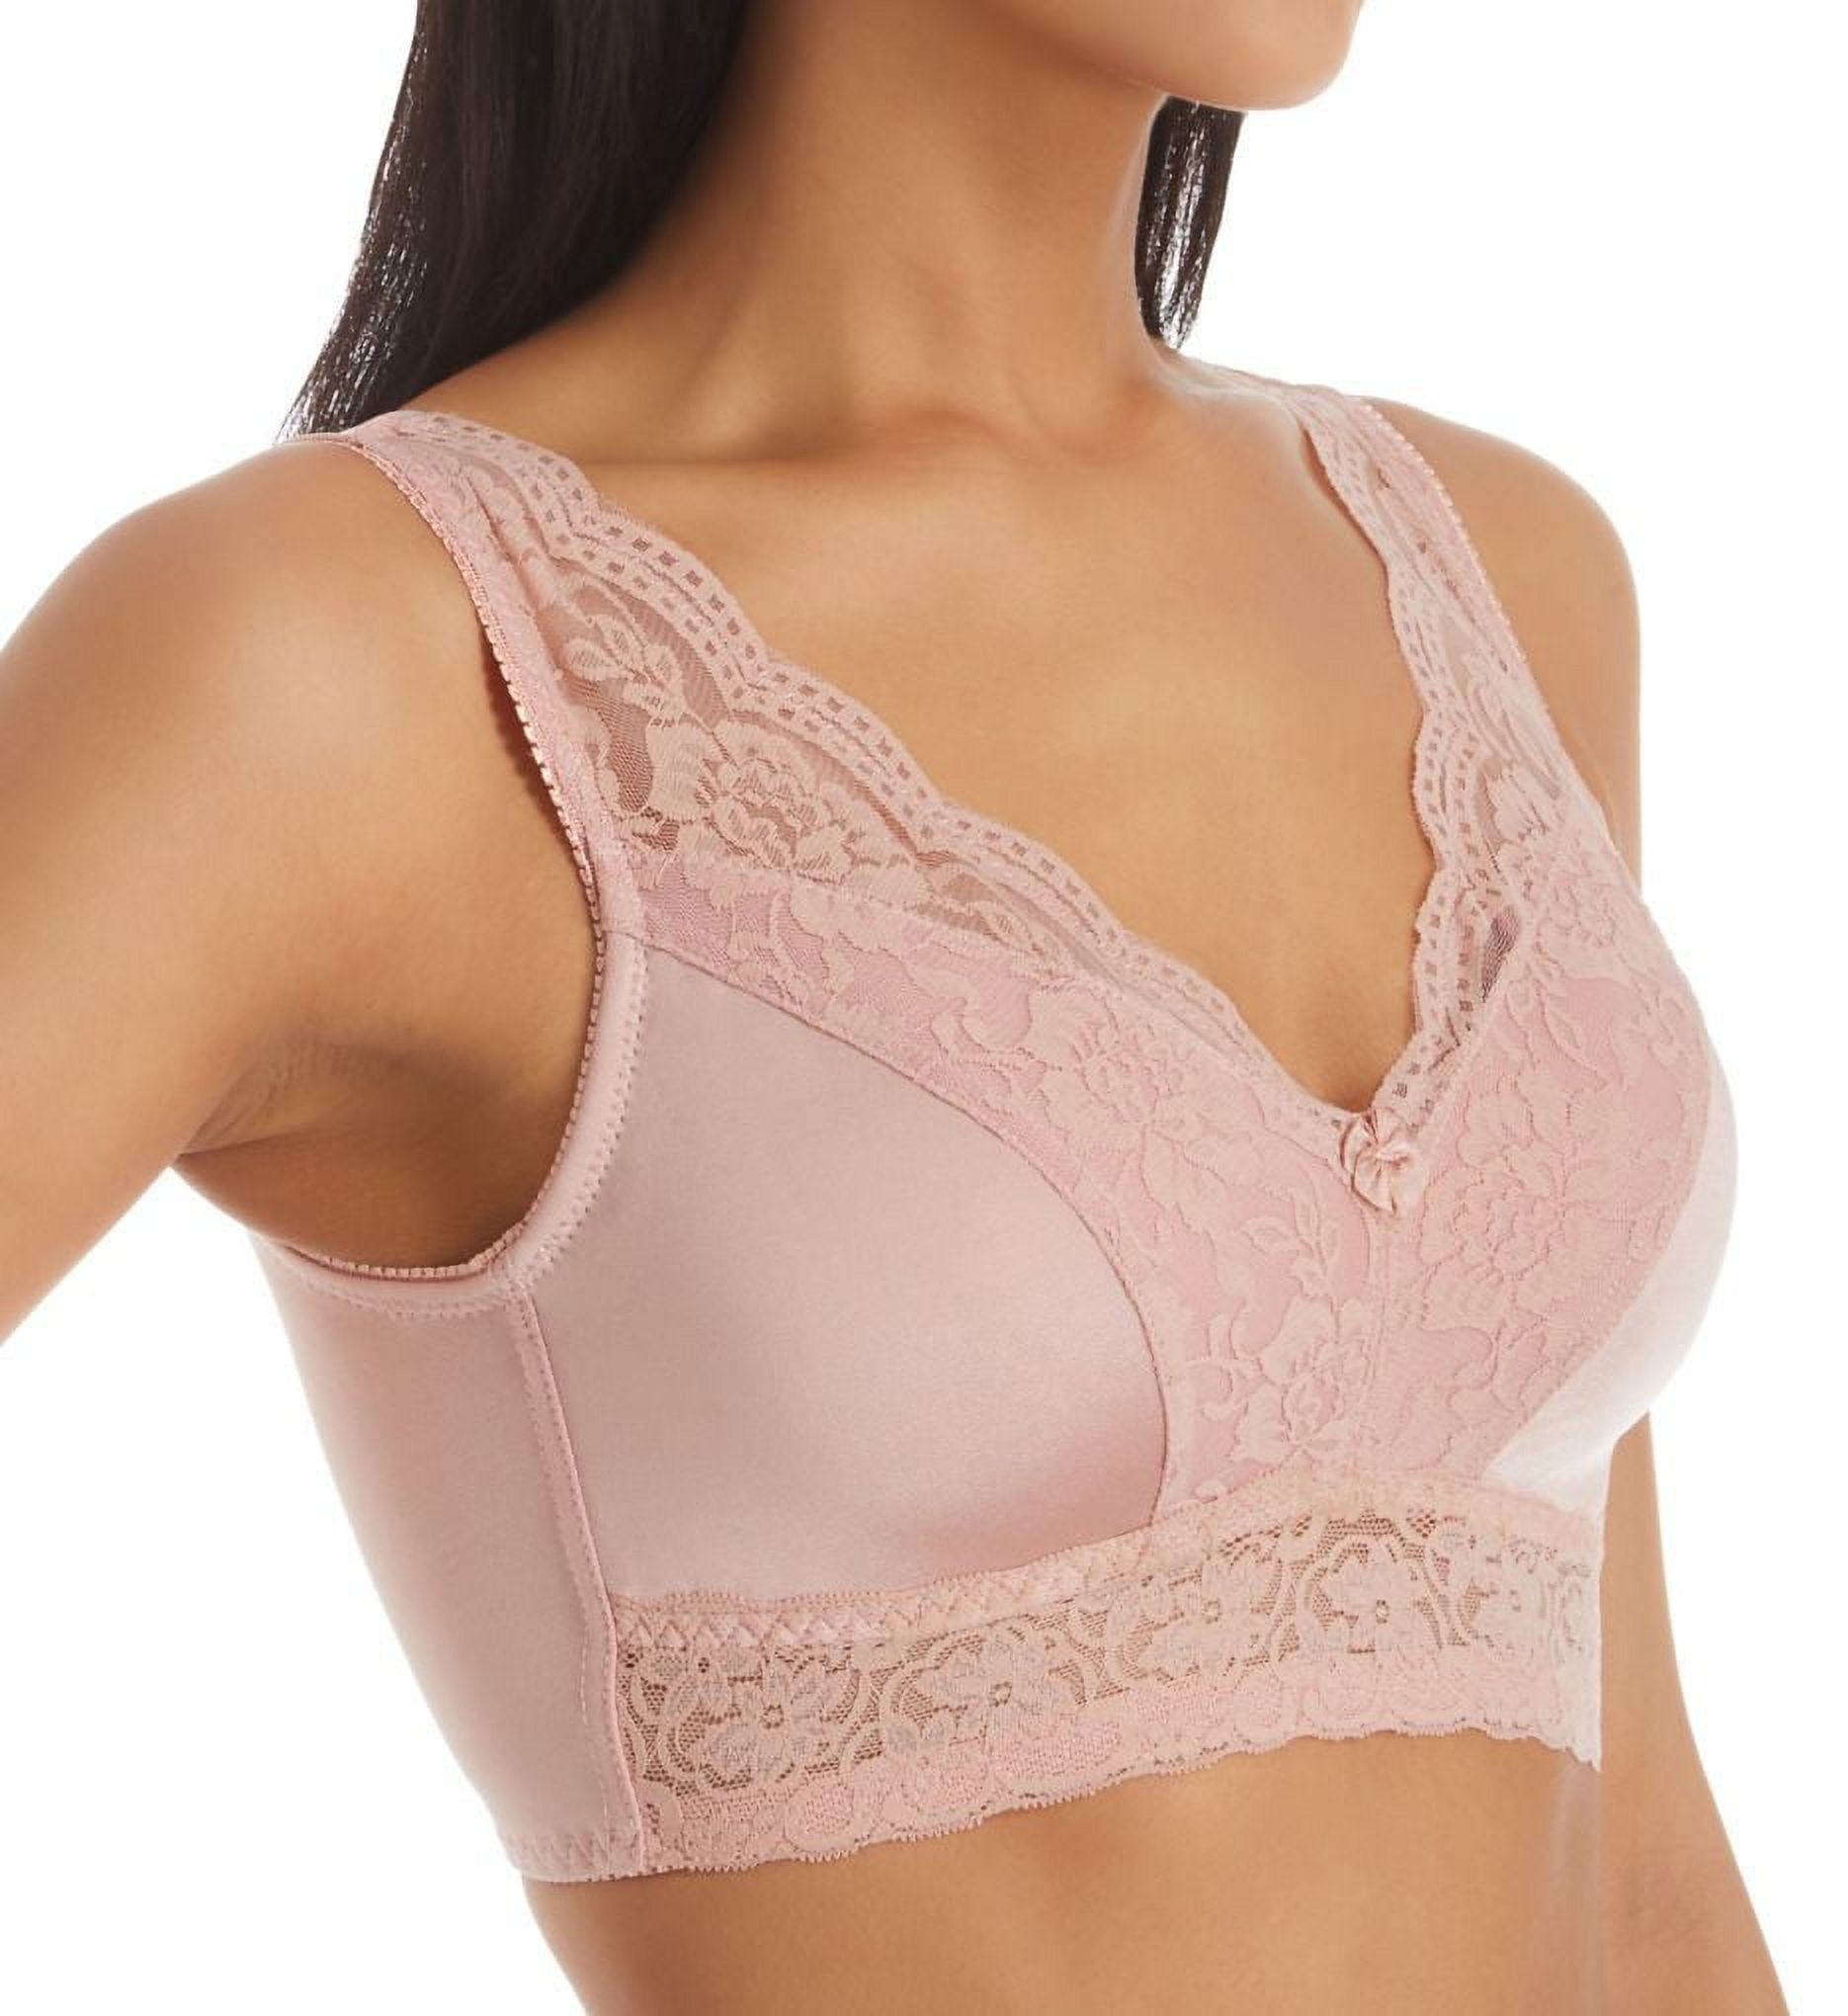 Ahh by Rhonda Shear Women's PinUp Girl Lace Leisure Bra with